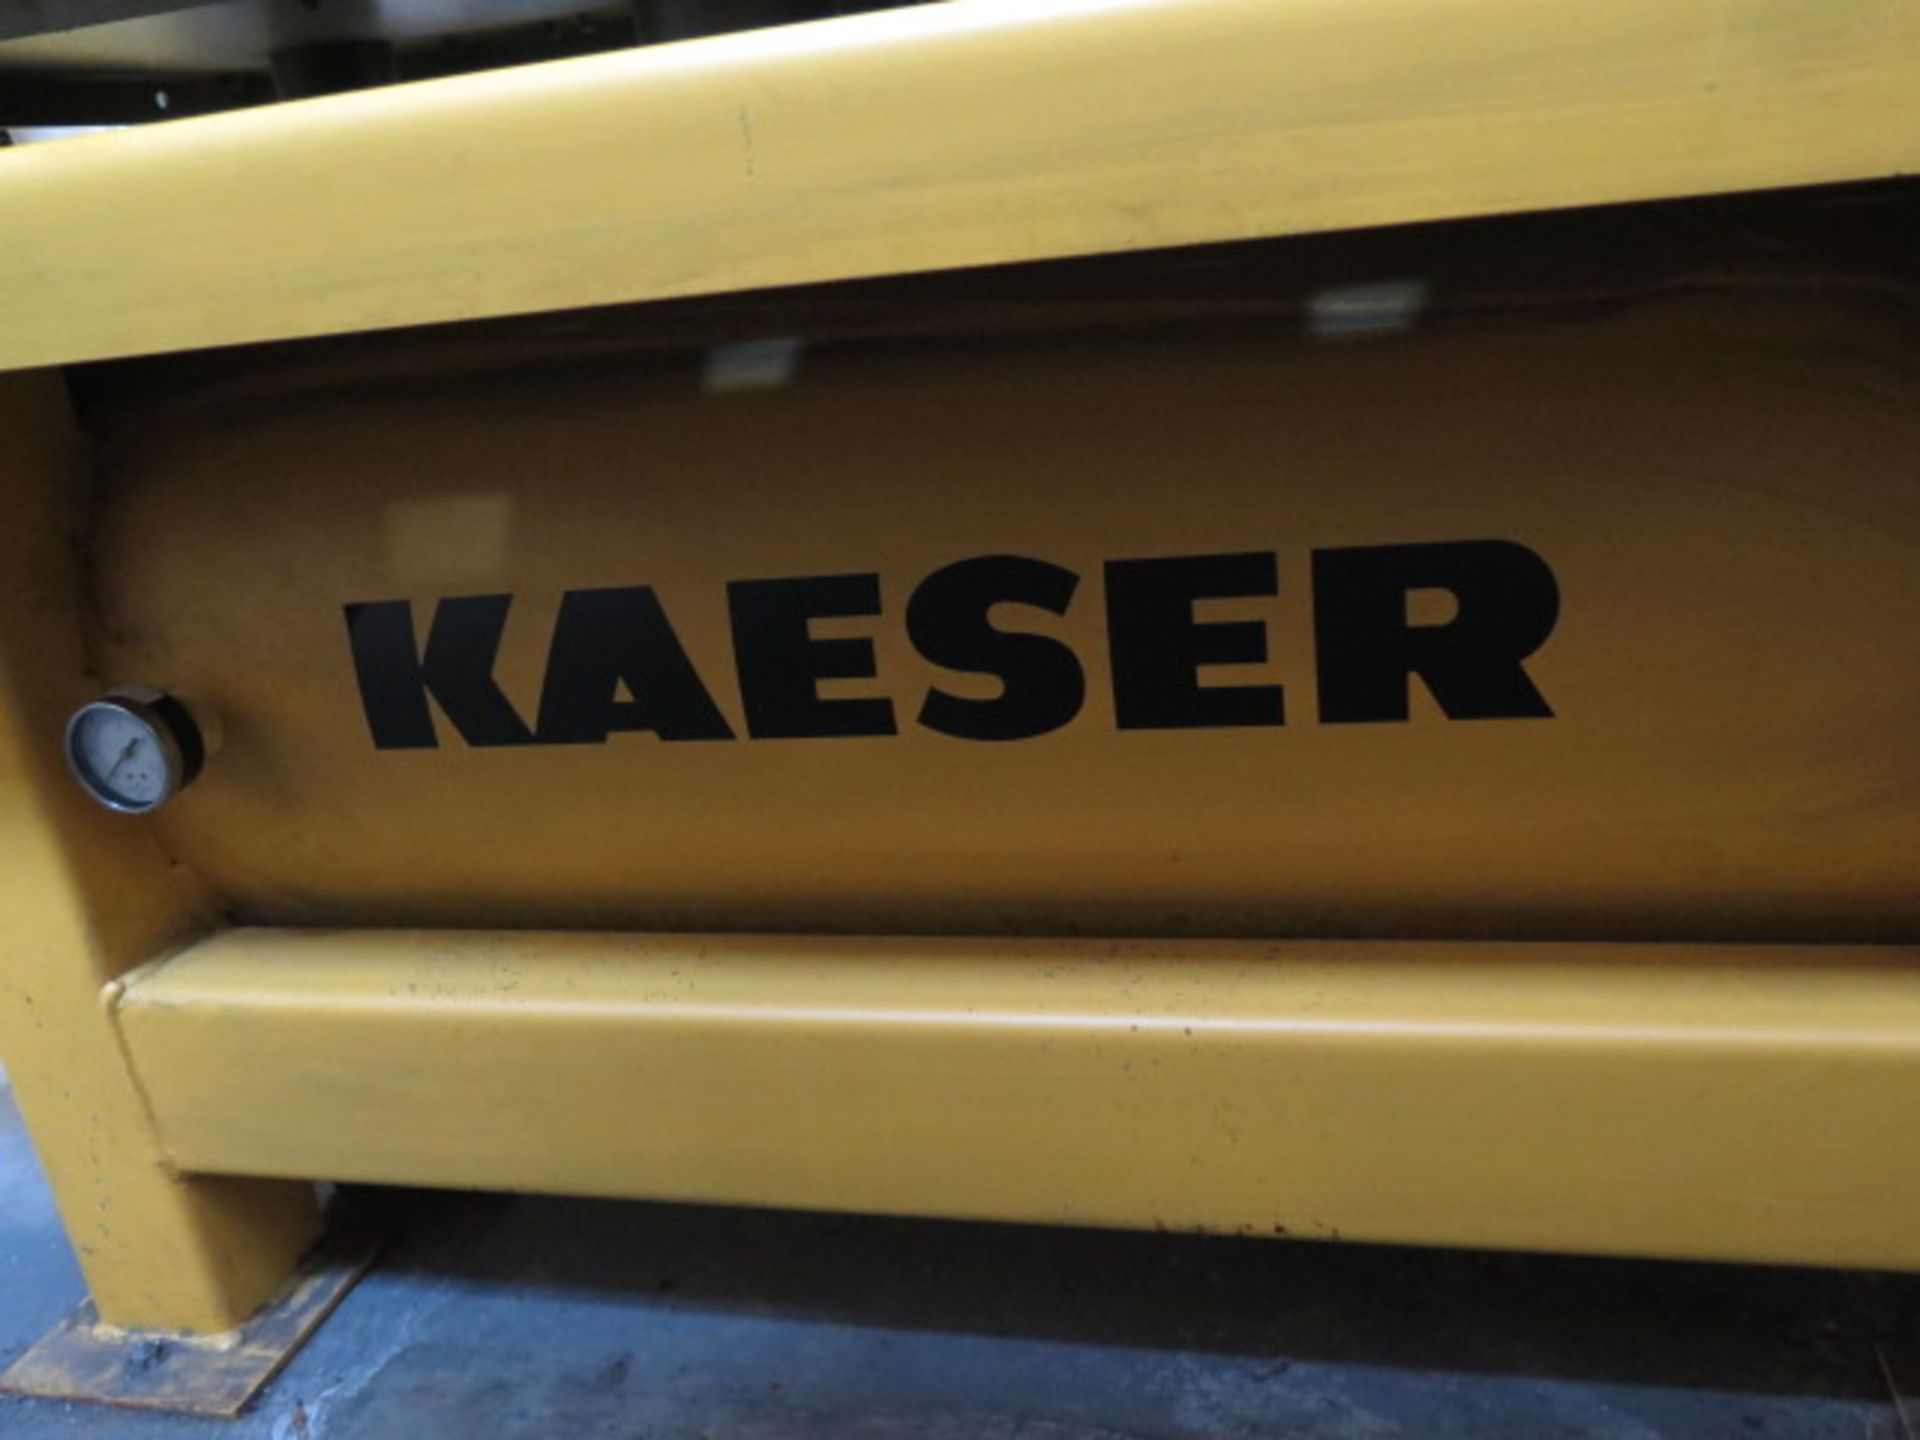 2006 Kaeser AS20T 20Hp Rotary Air Compressor s/n 1152 w/ Sigma Digital Controls, SOLD AS IS - Image 8 of 9